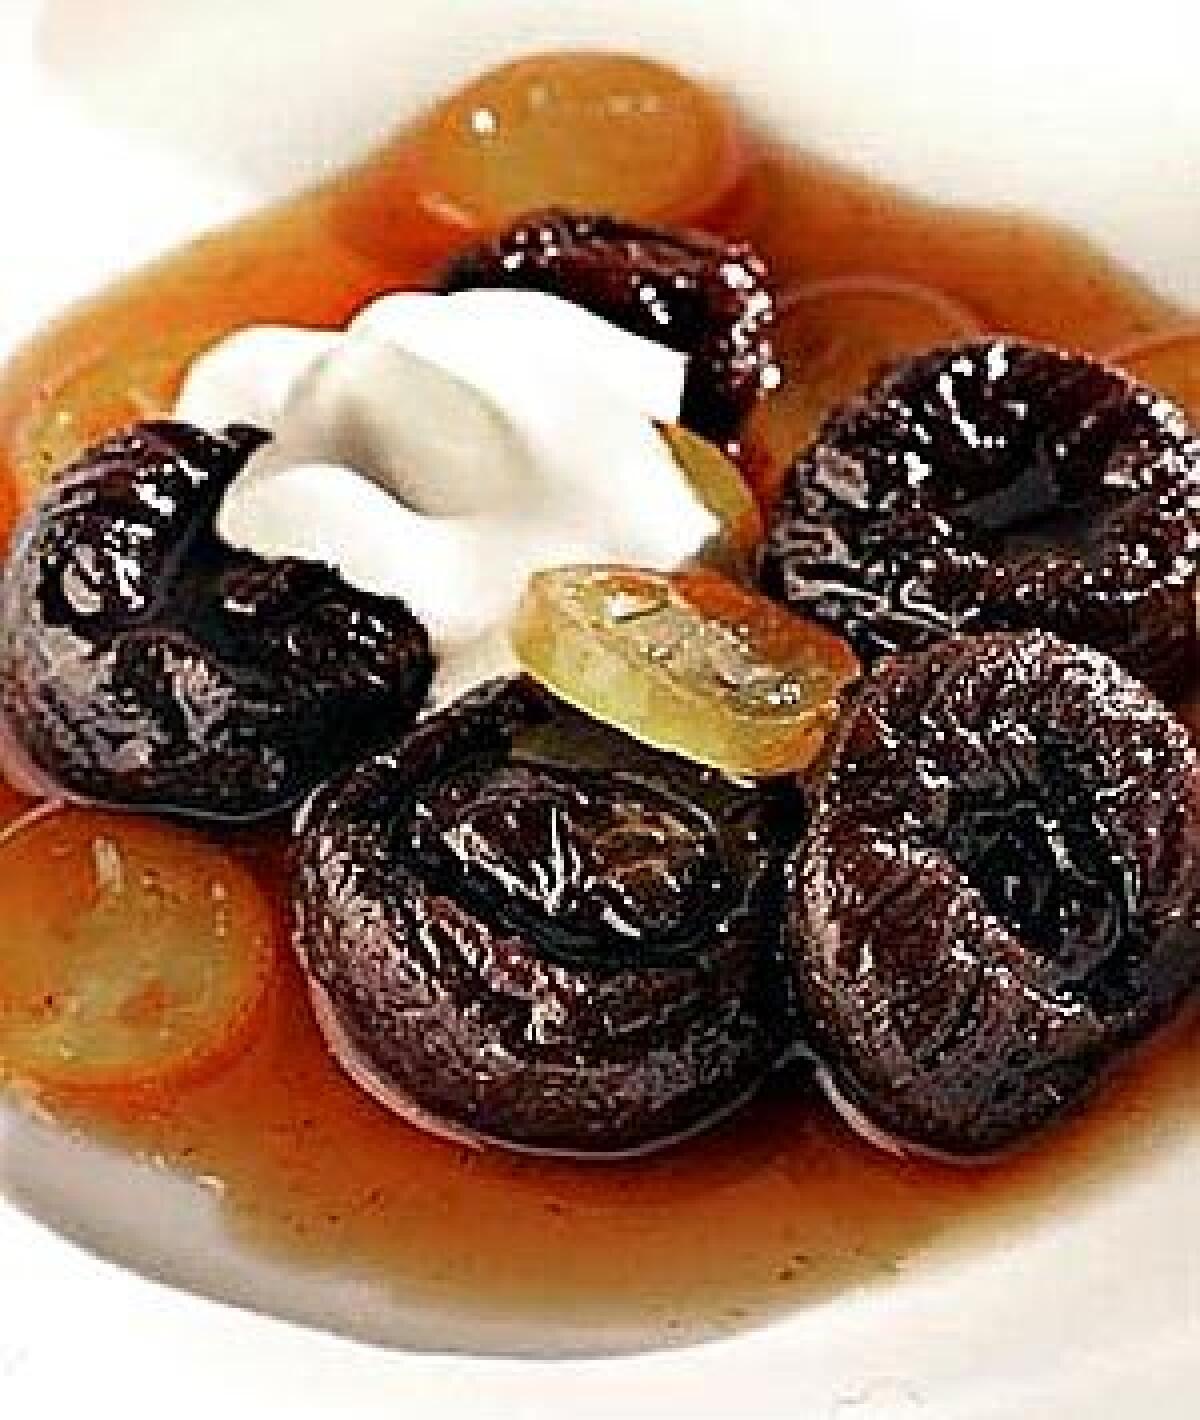 Tangy glazed kumquats perk up a bowl of poached prunes.